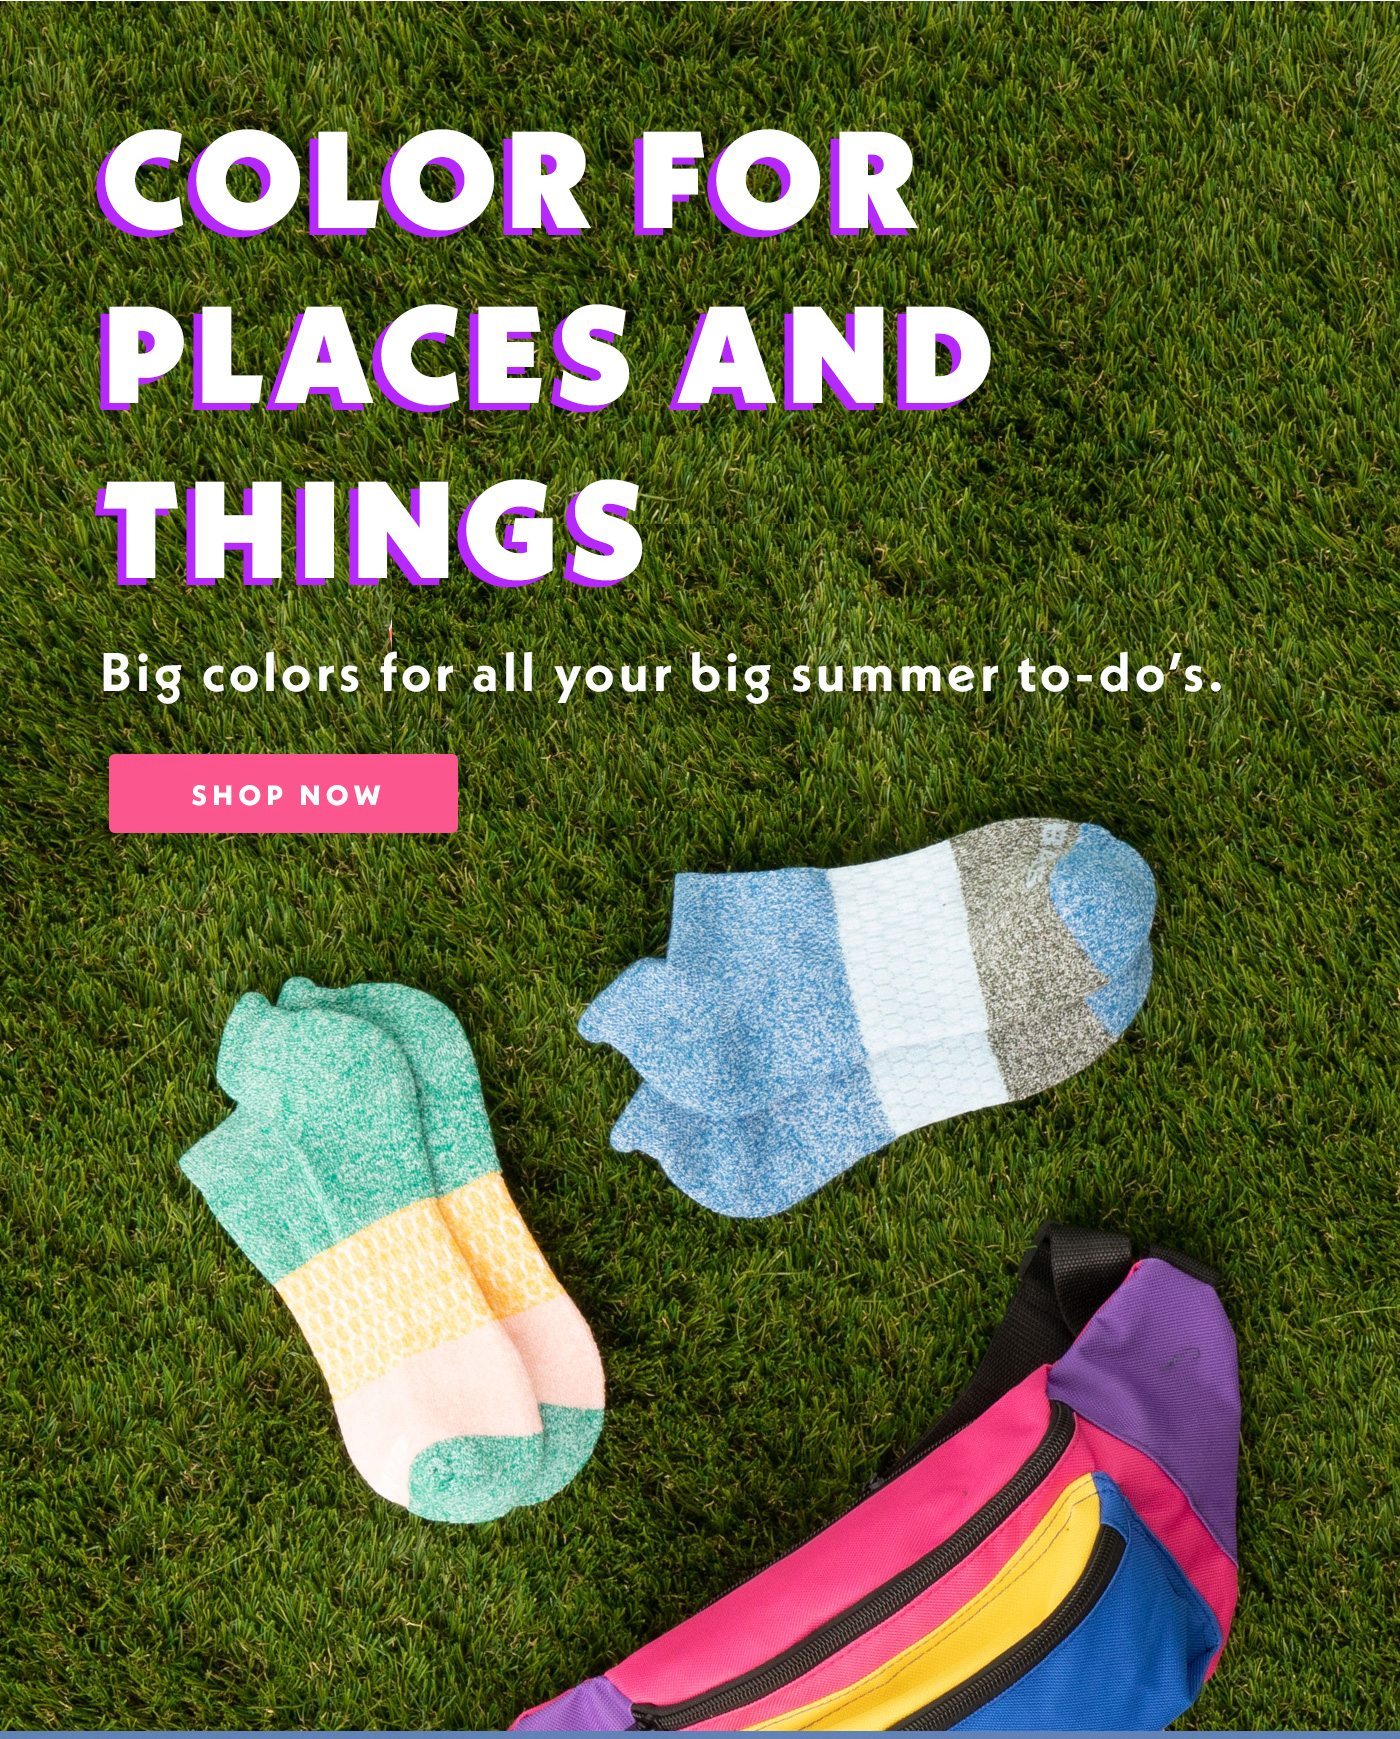 Colors for places and things. Big colors for all your big summer to-do's.